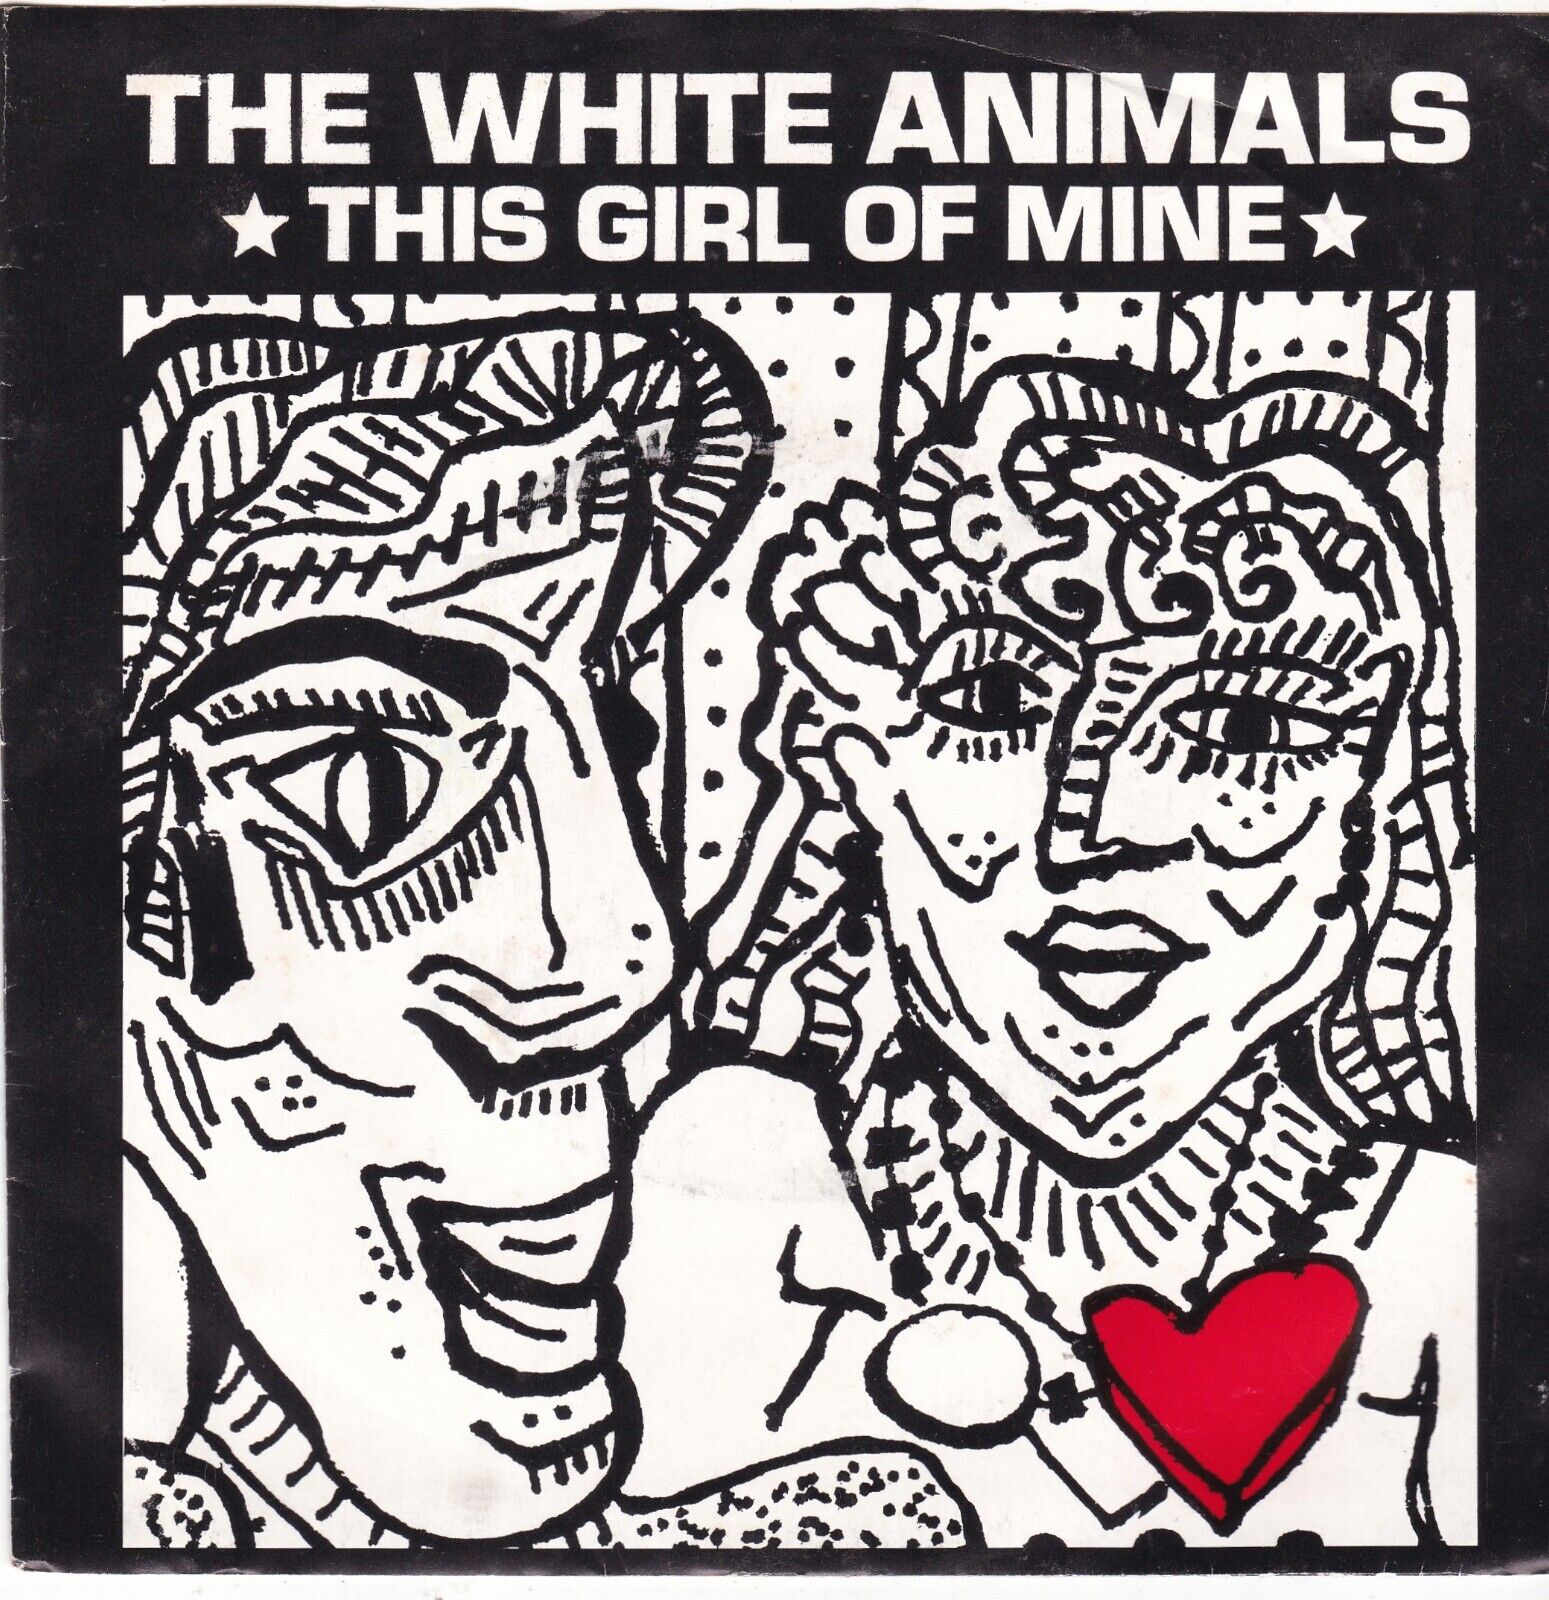 This Girl Of Mine by The White Animals (7" Vinyl, 1984, Dread Beat, P/S) VG+/VG+